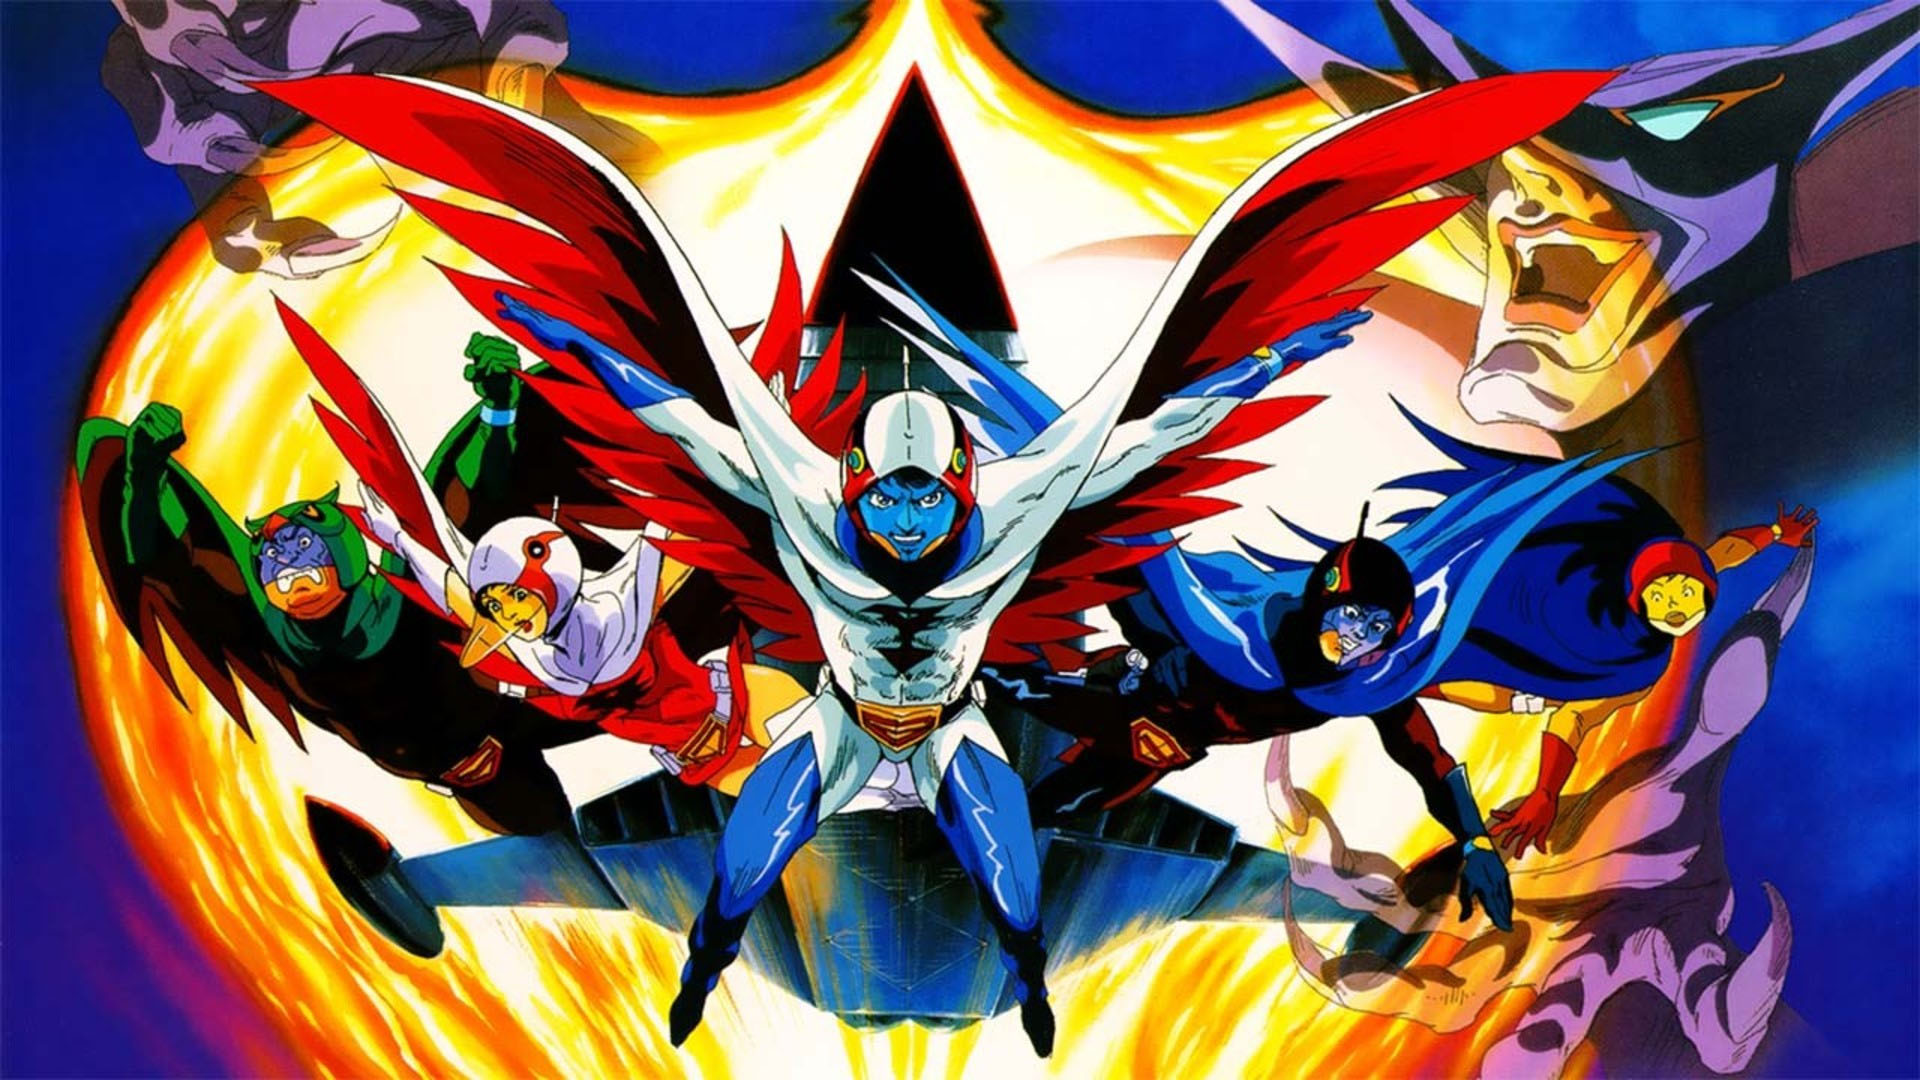 Gatchaman: Complete Collection